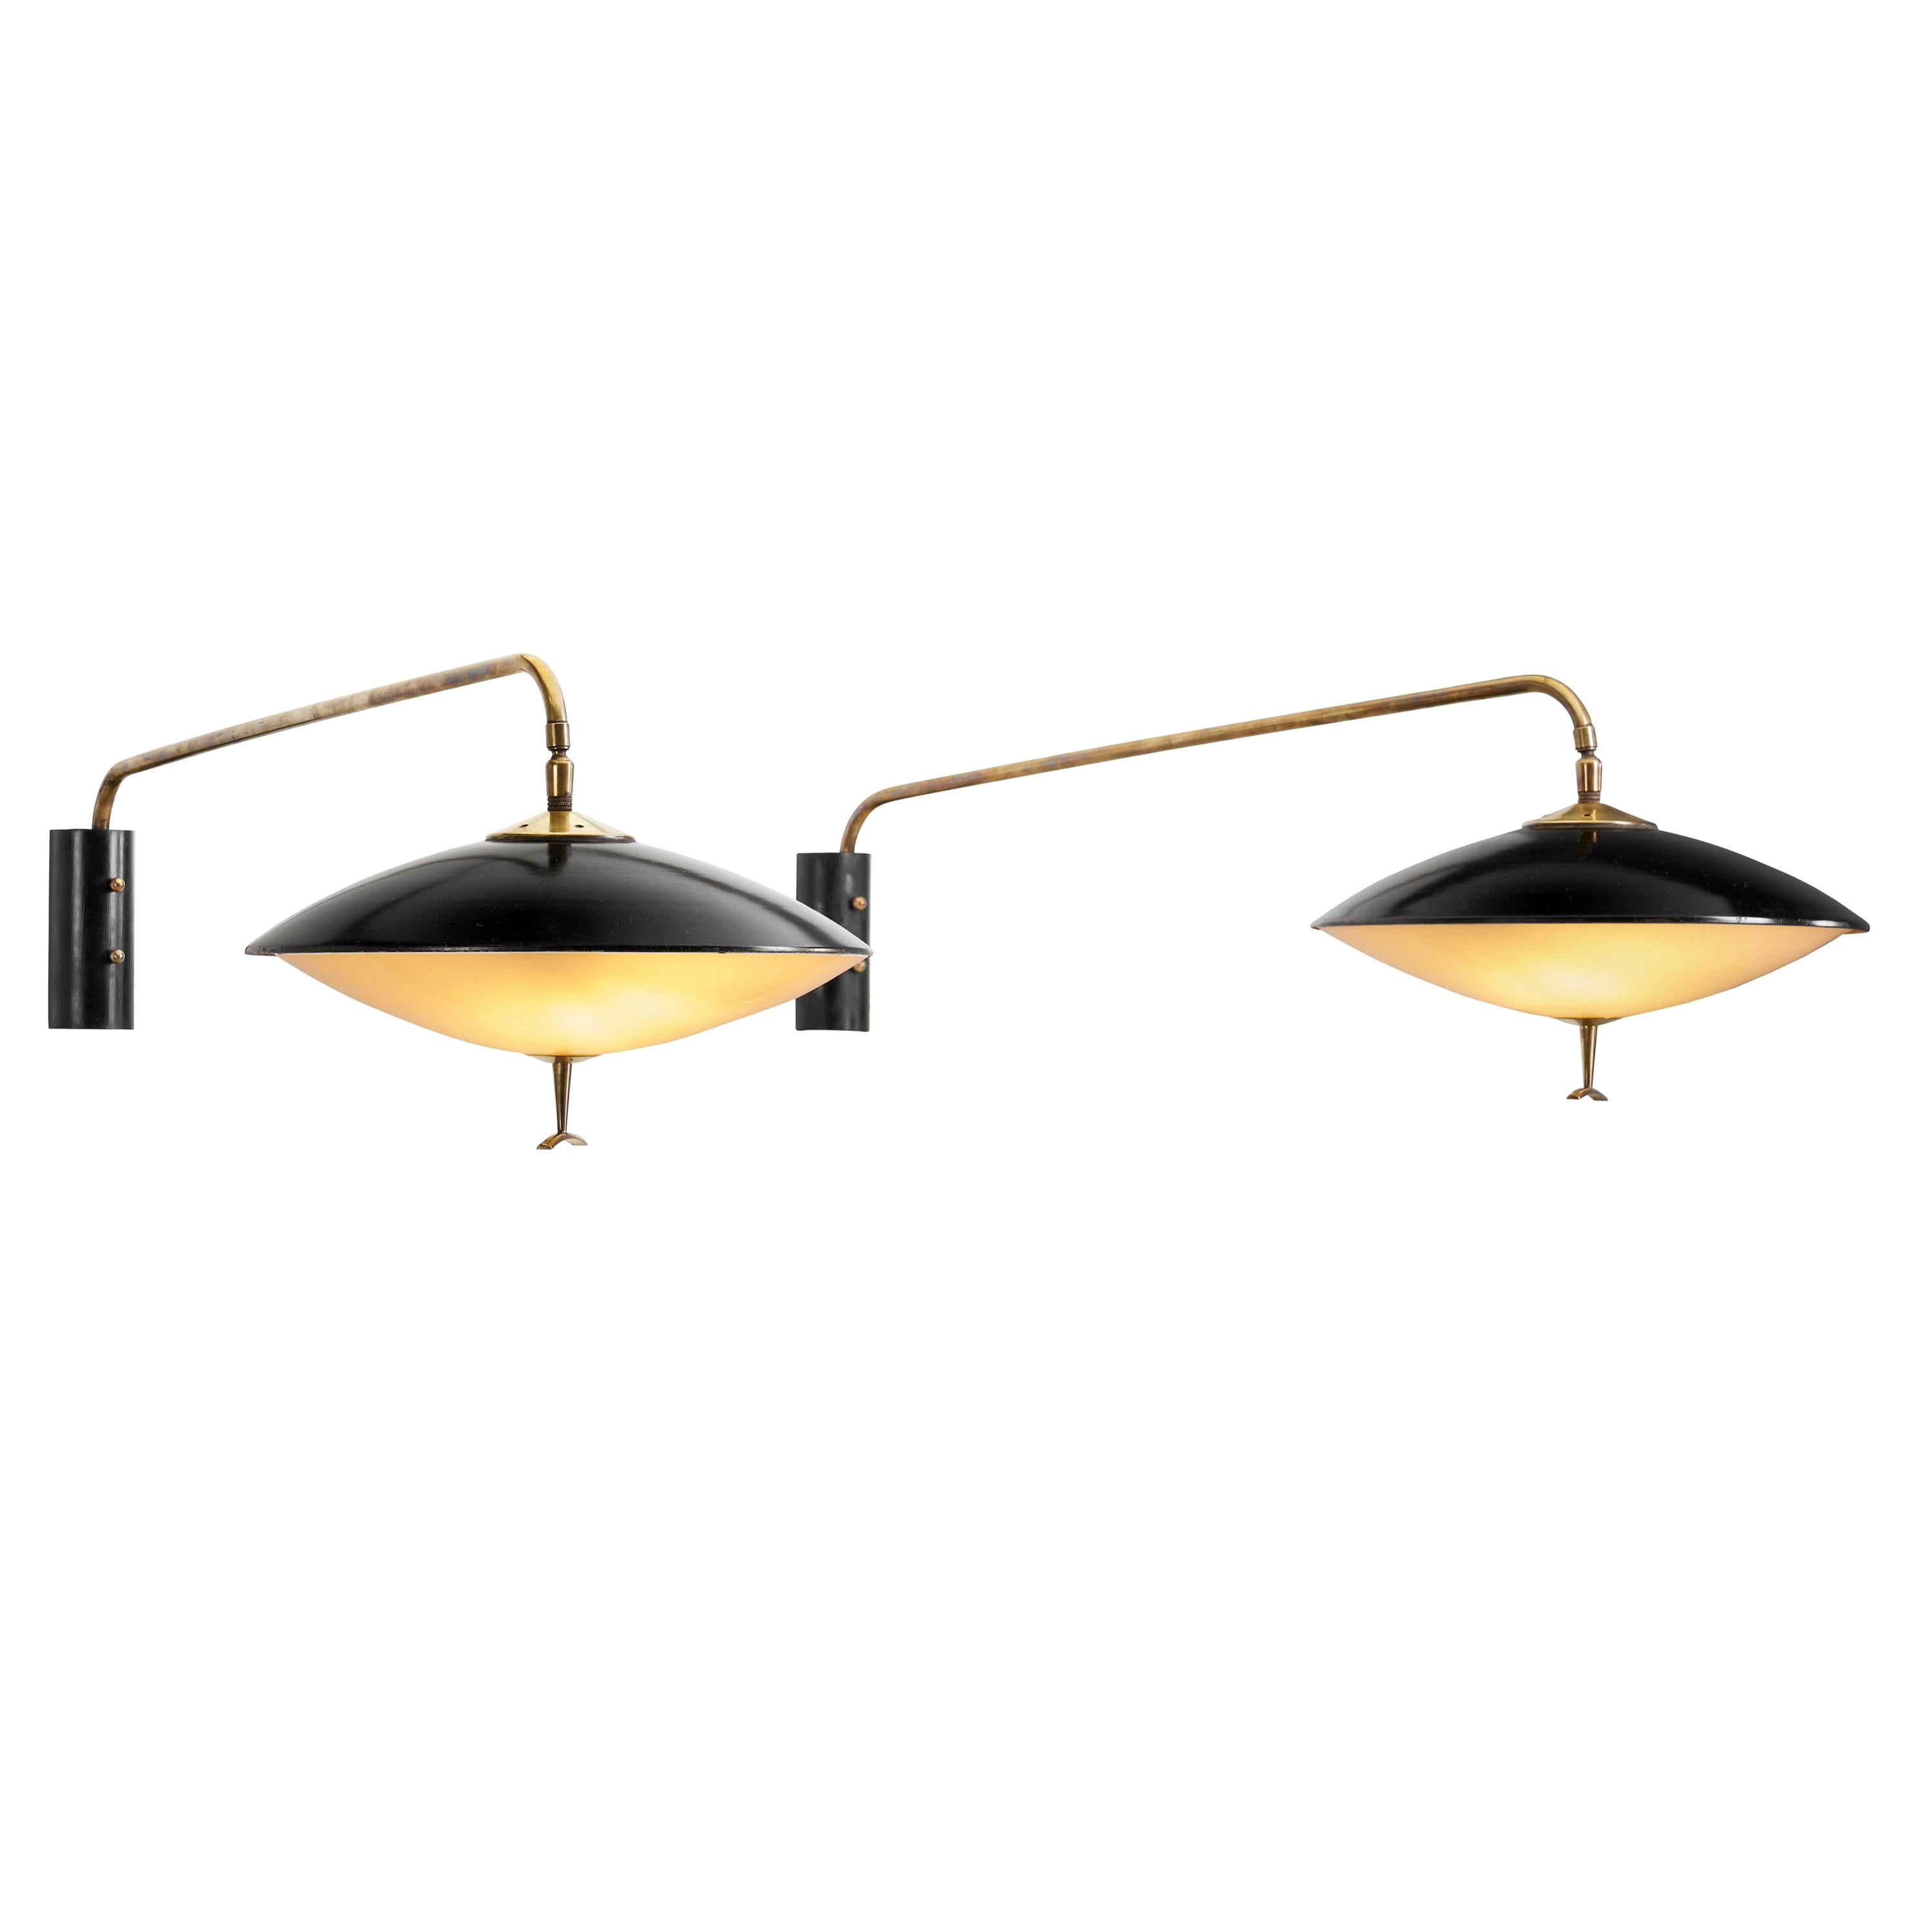 Black Lacquered Metal Saucer Wall Lights by Maison Arlus, France ca 1950s For Sale